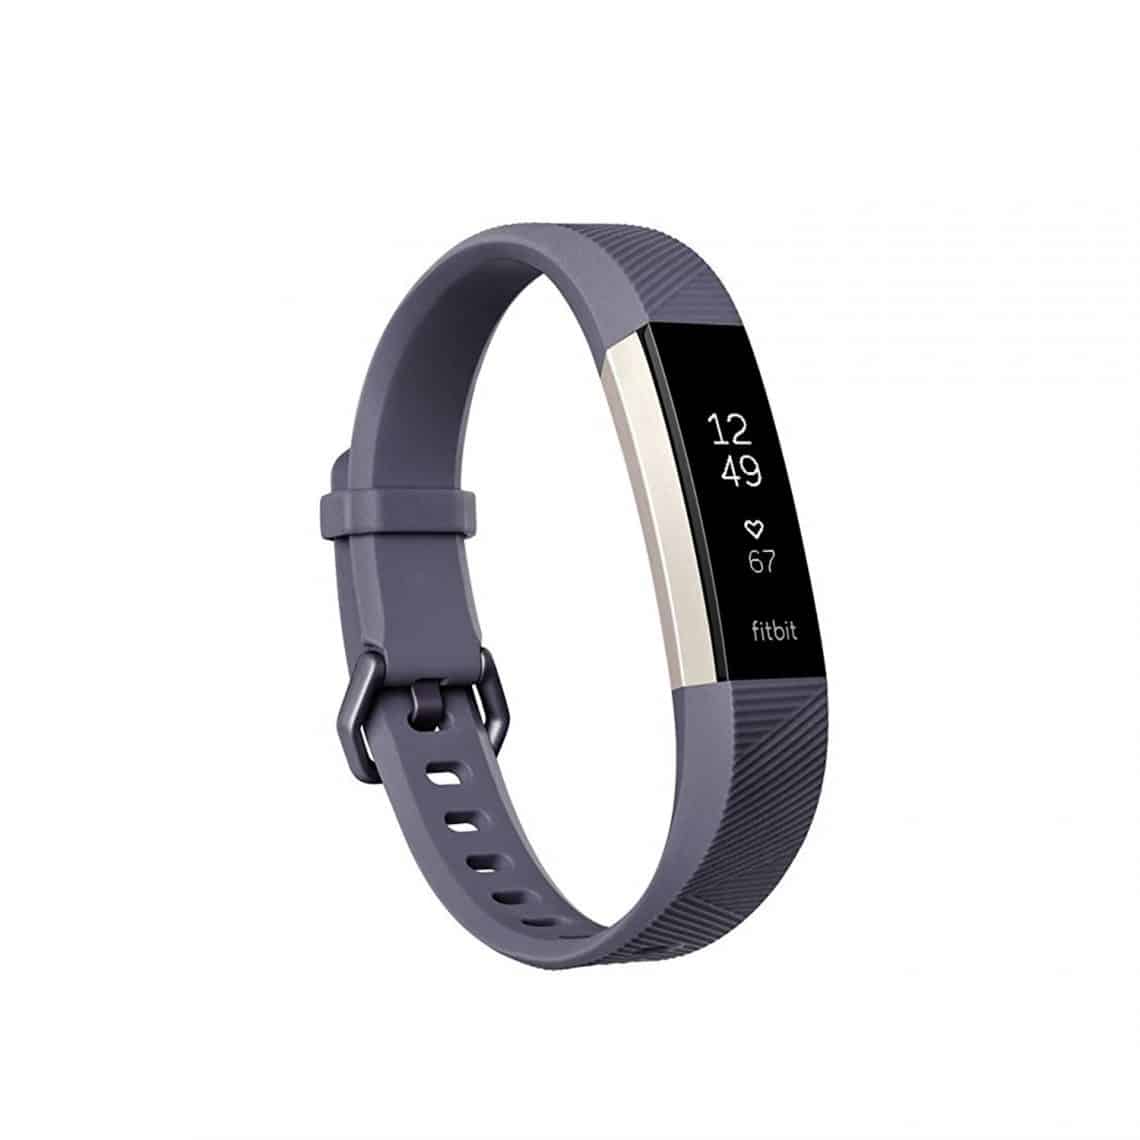 Top 10 Best Heart Rate Monitors in 2022 Reviews | Buyer's Guide